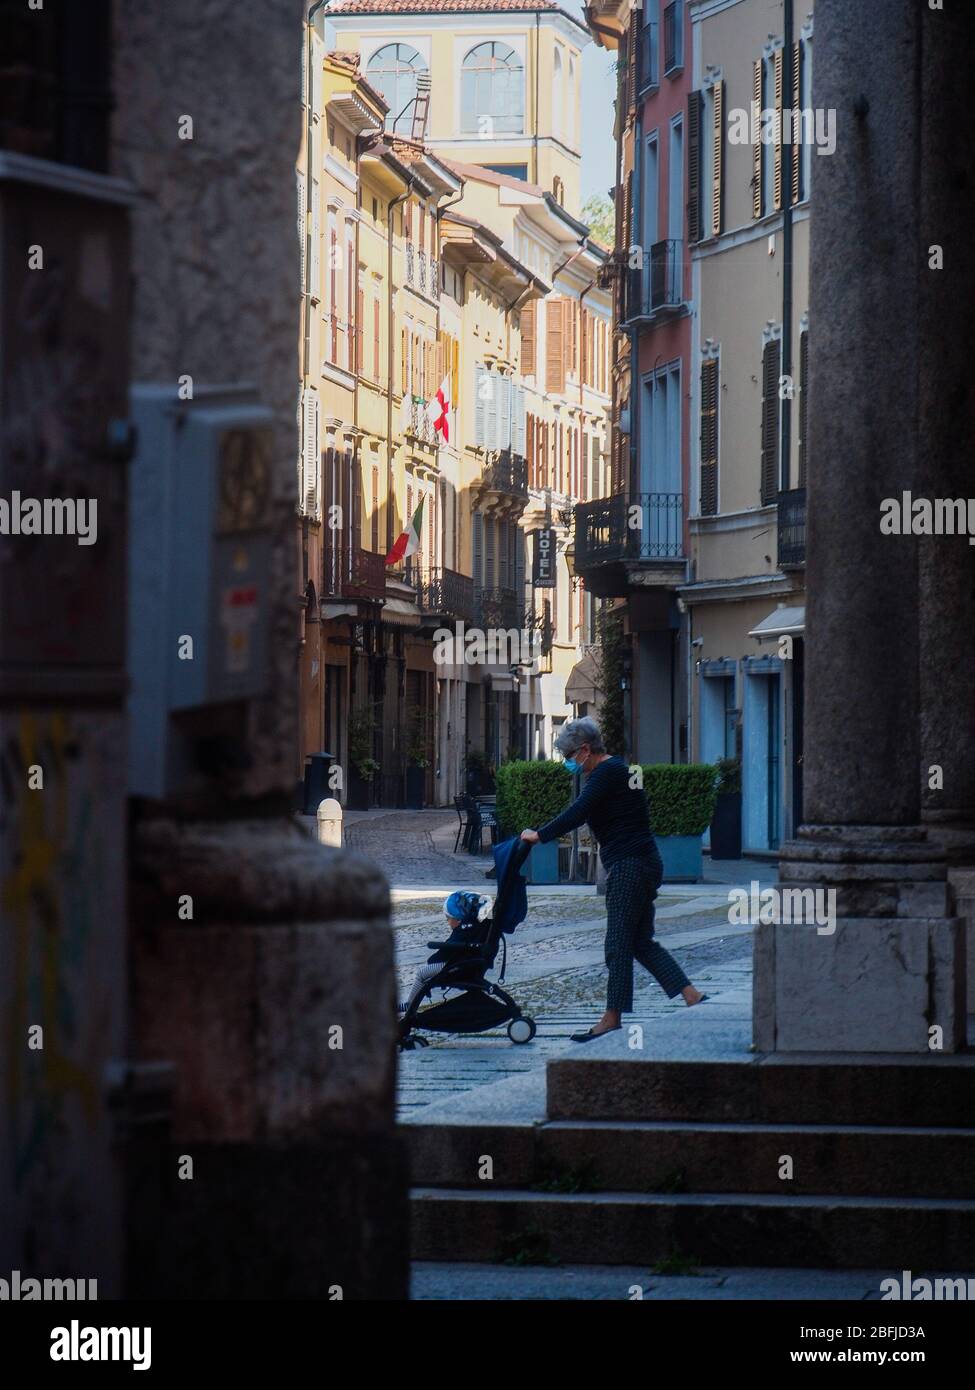 Cremona, Lombardy, Italy - April 19th 2020 - walking, dog walk, everyday life during covid-19 lockdown outbreak Stock Photo